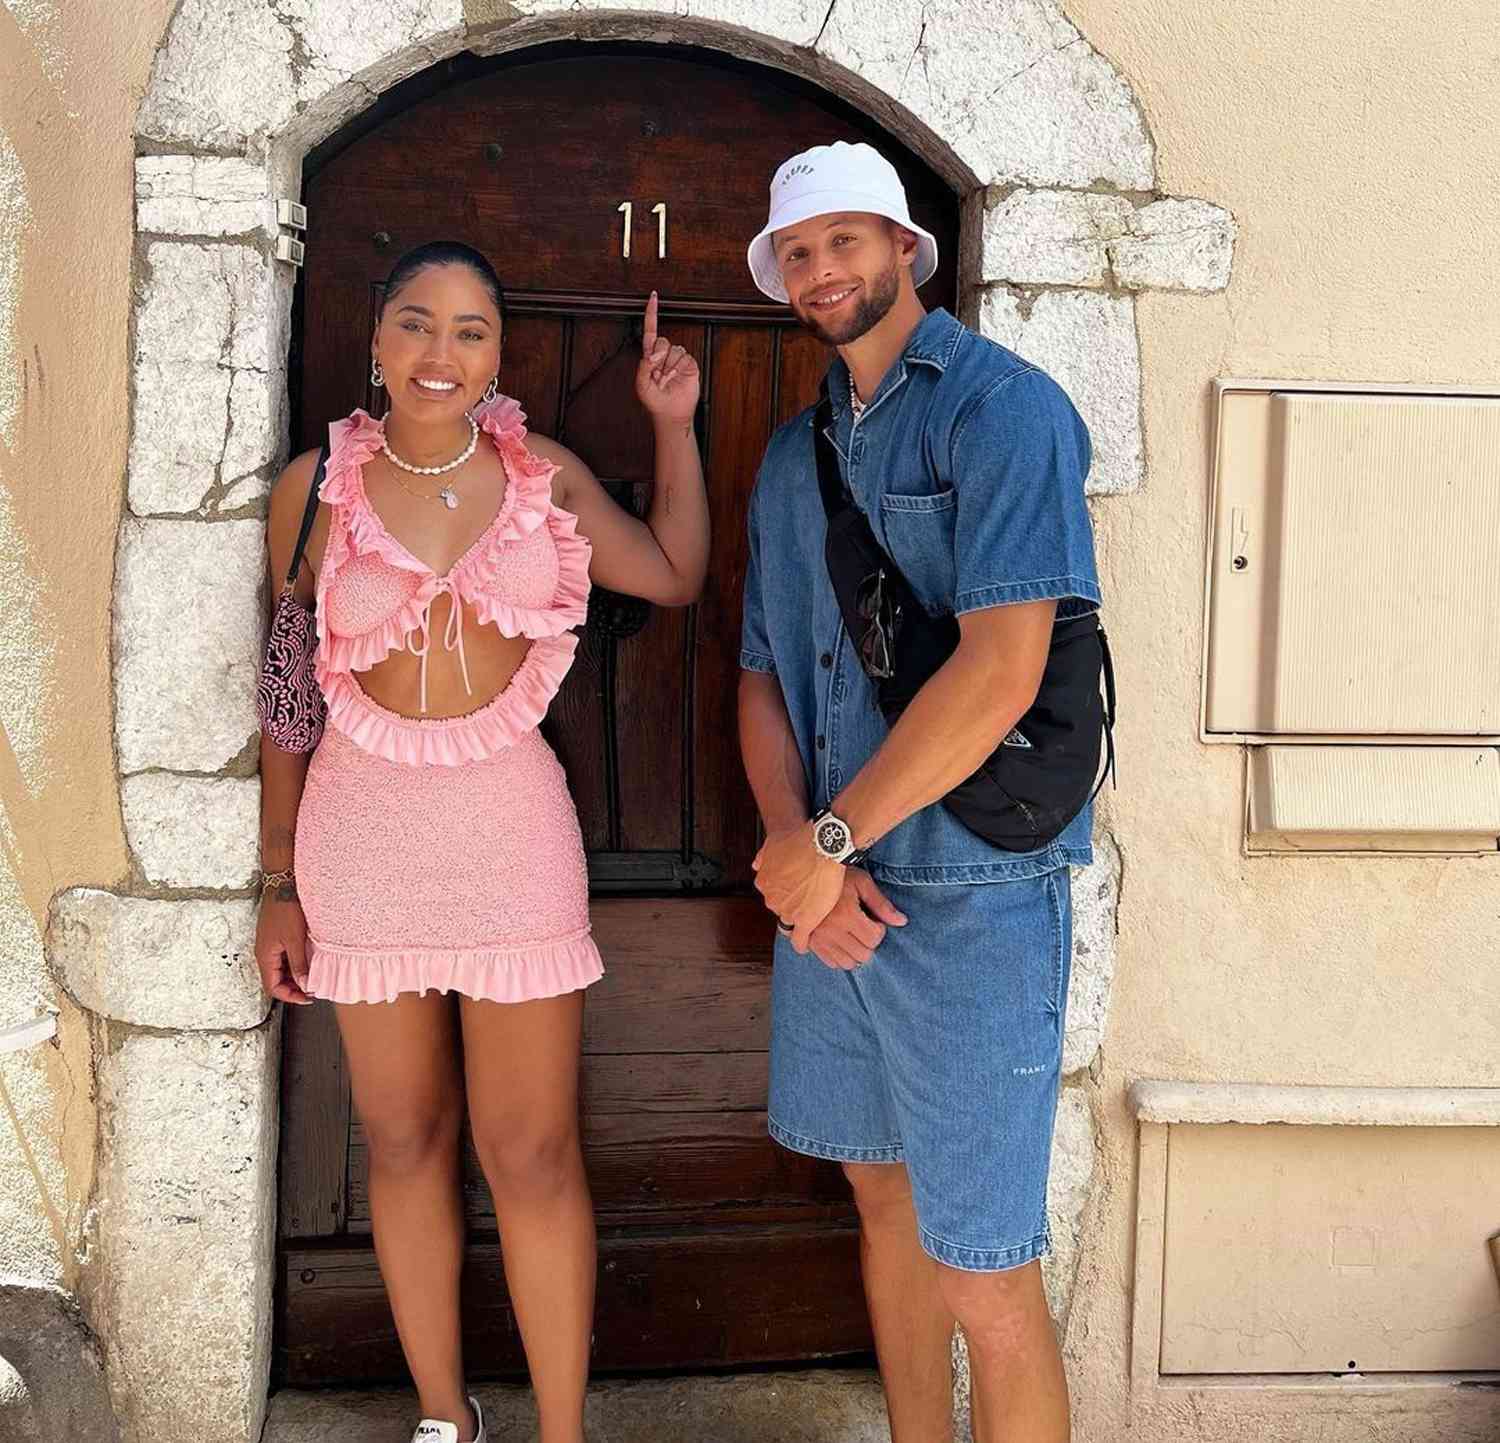 Stephen and Ayesha Curry Celebrate 11 结婚年数: 'Every Year Just Gets Better'